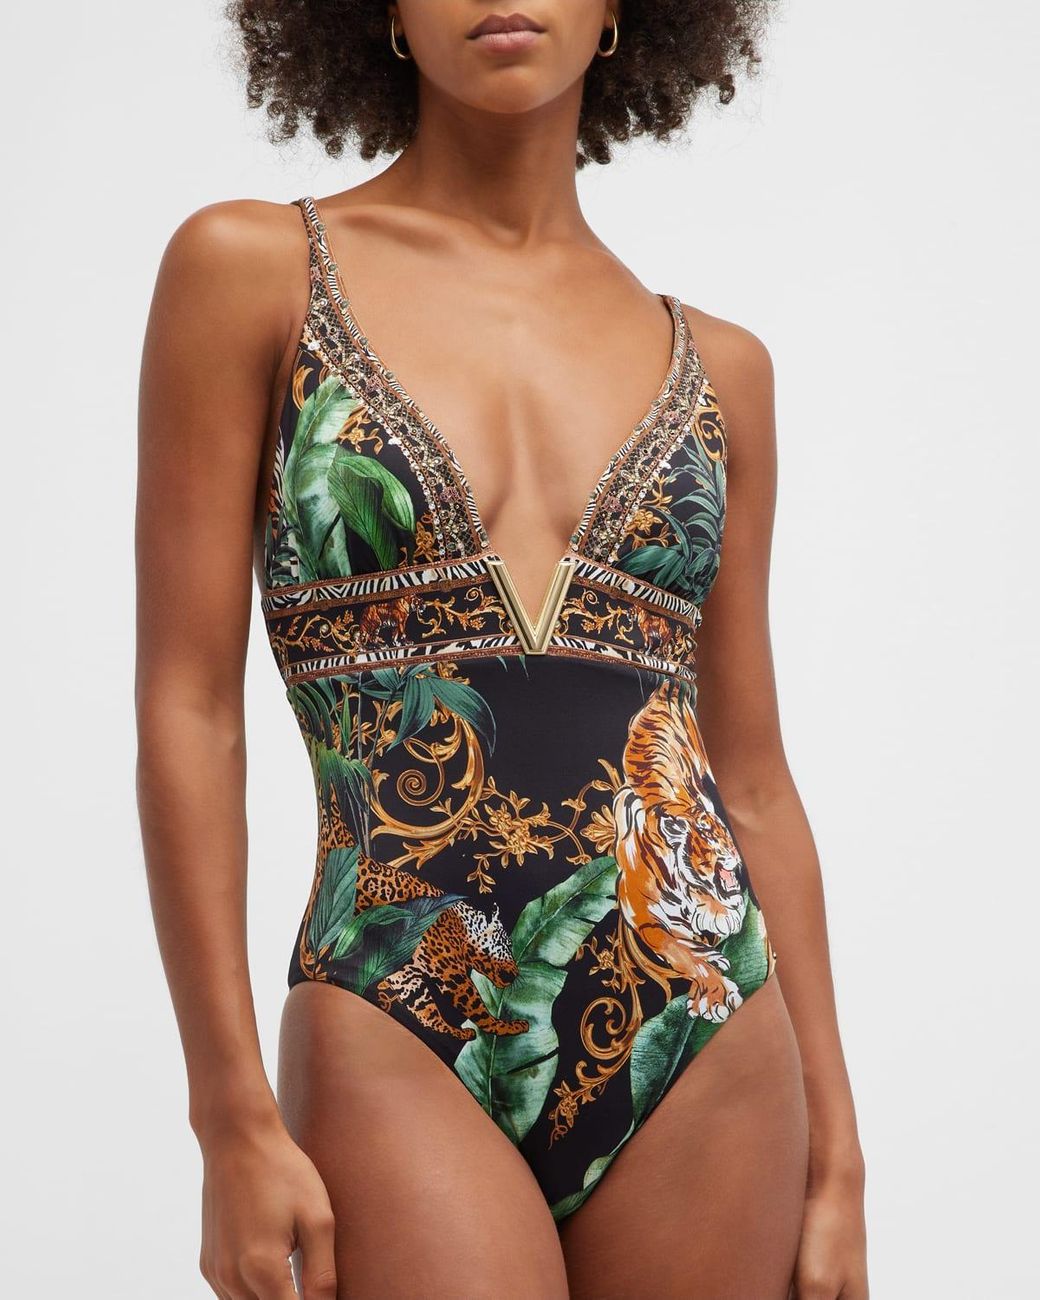 Camilla Easy Tiger High Tri One-piece Swimsuit W/ Front Trim in Black | Lyst